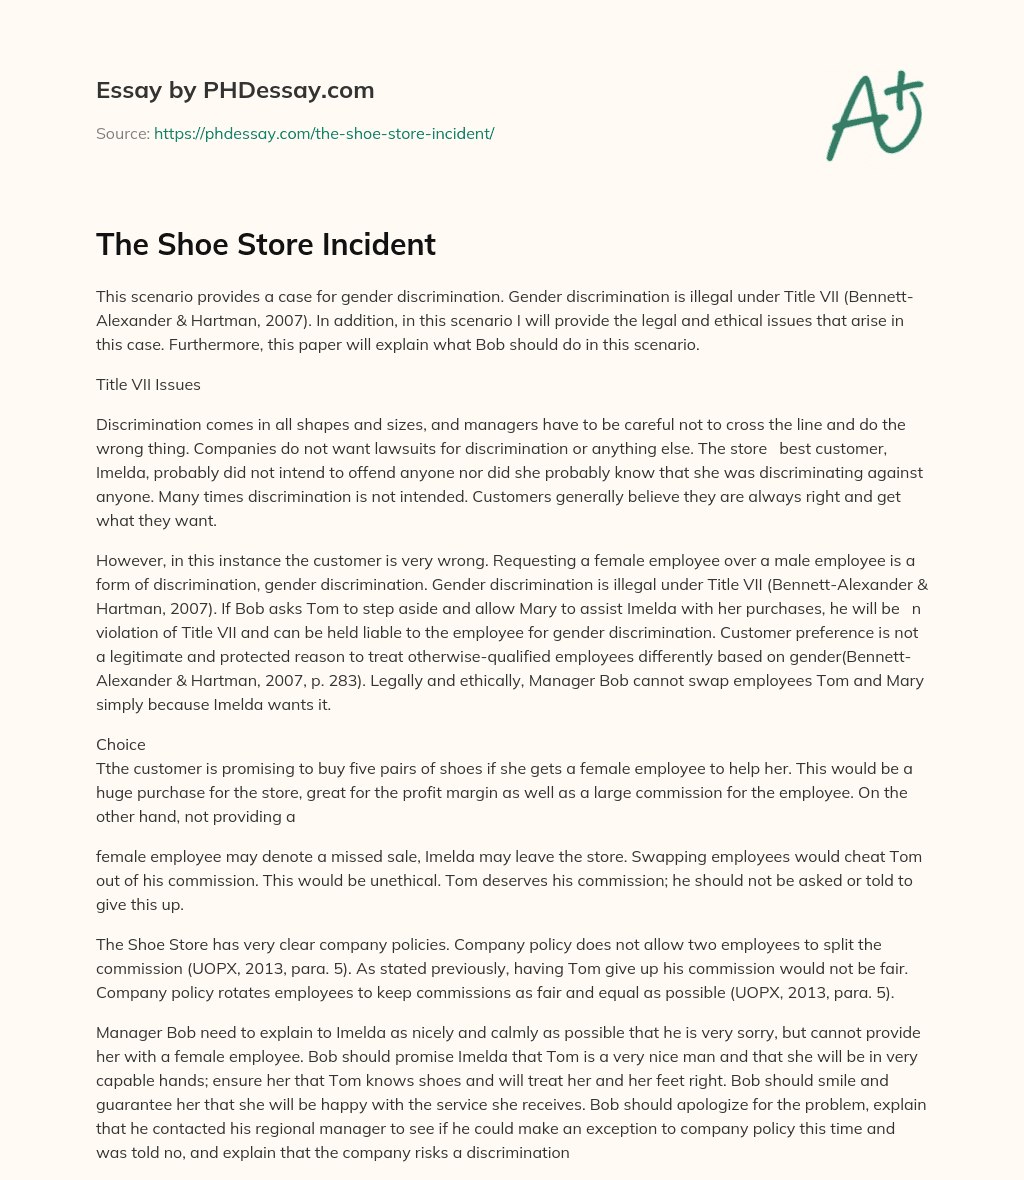 The Shoe Store Incident essay